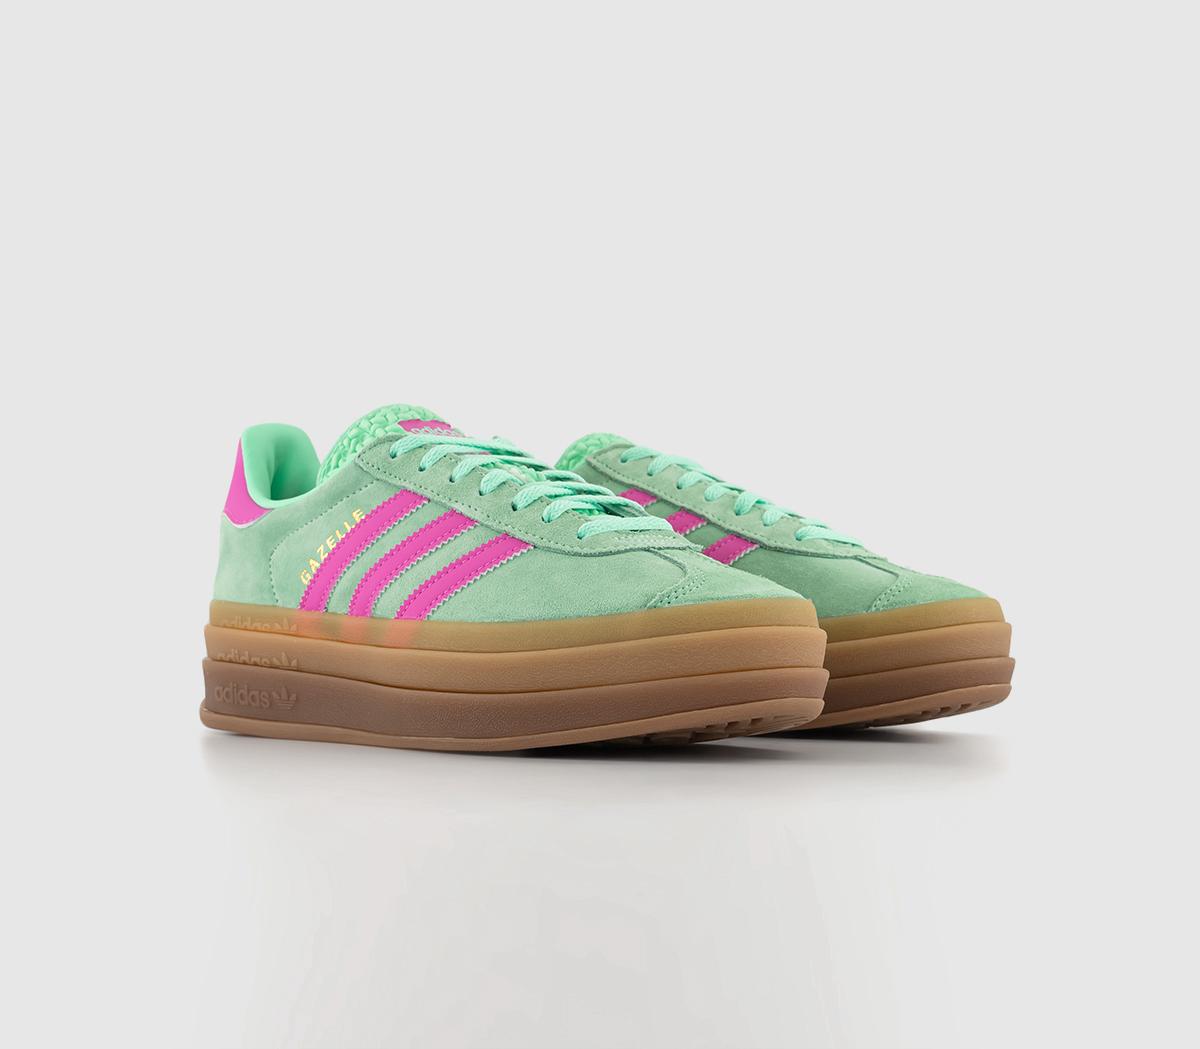 Adidas Gazelle Bold W Trainers Pulse Mint Screaming Pink Gum M2 Womens Trainers 6725